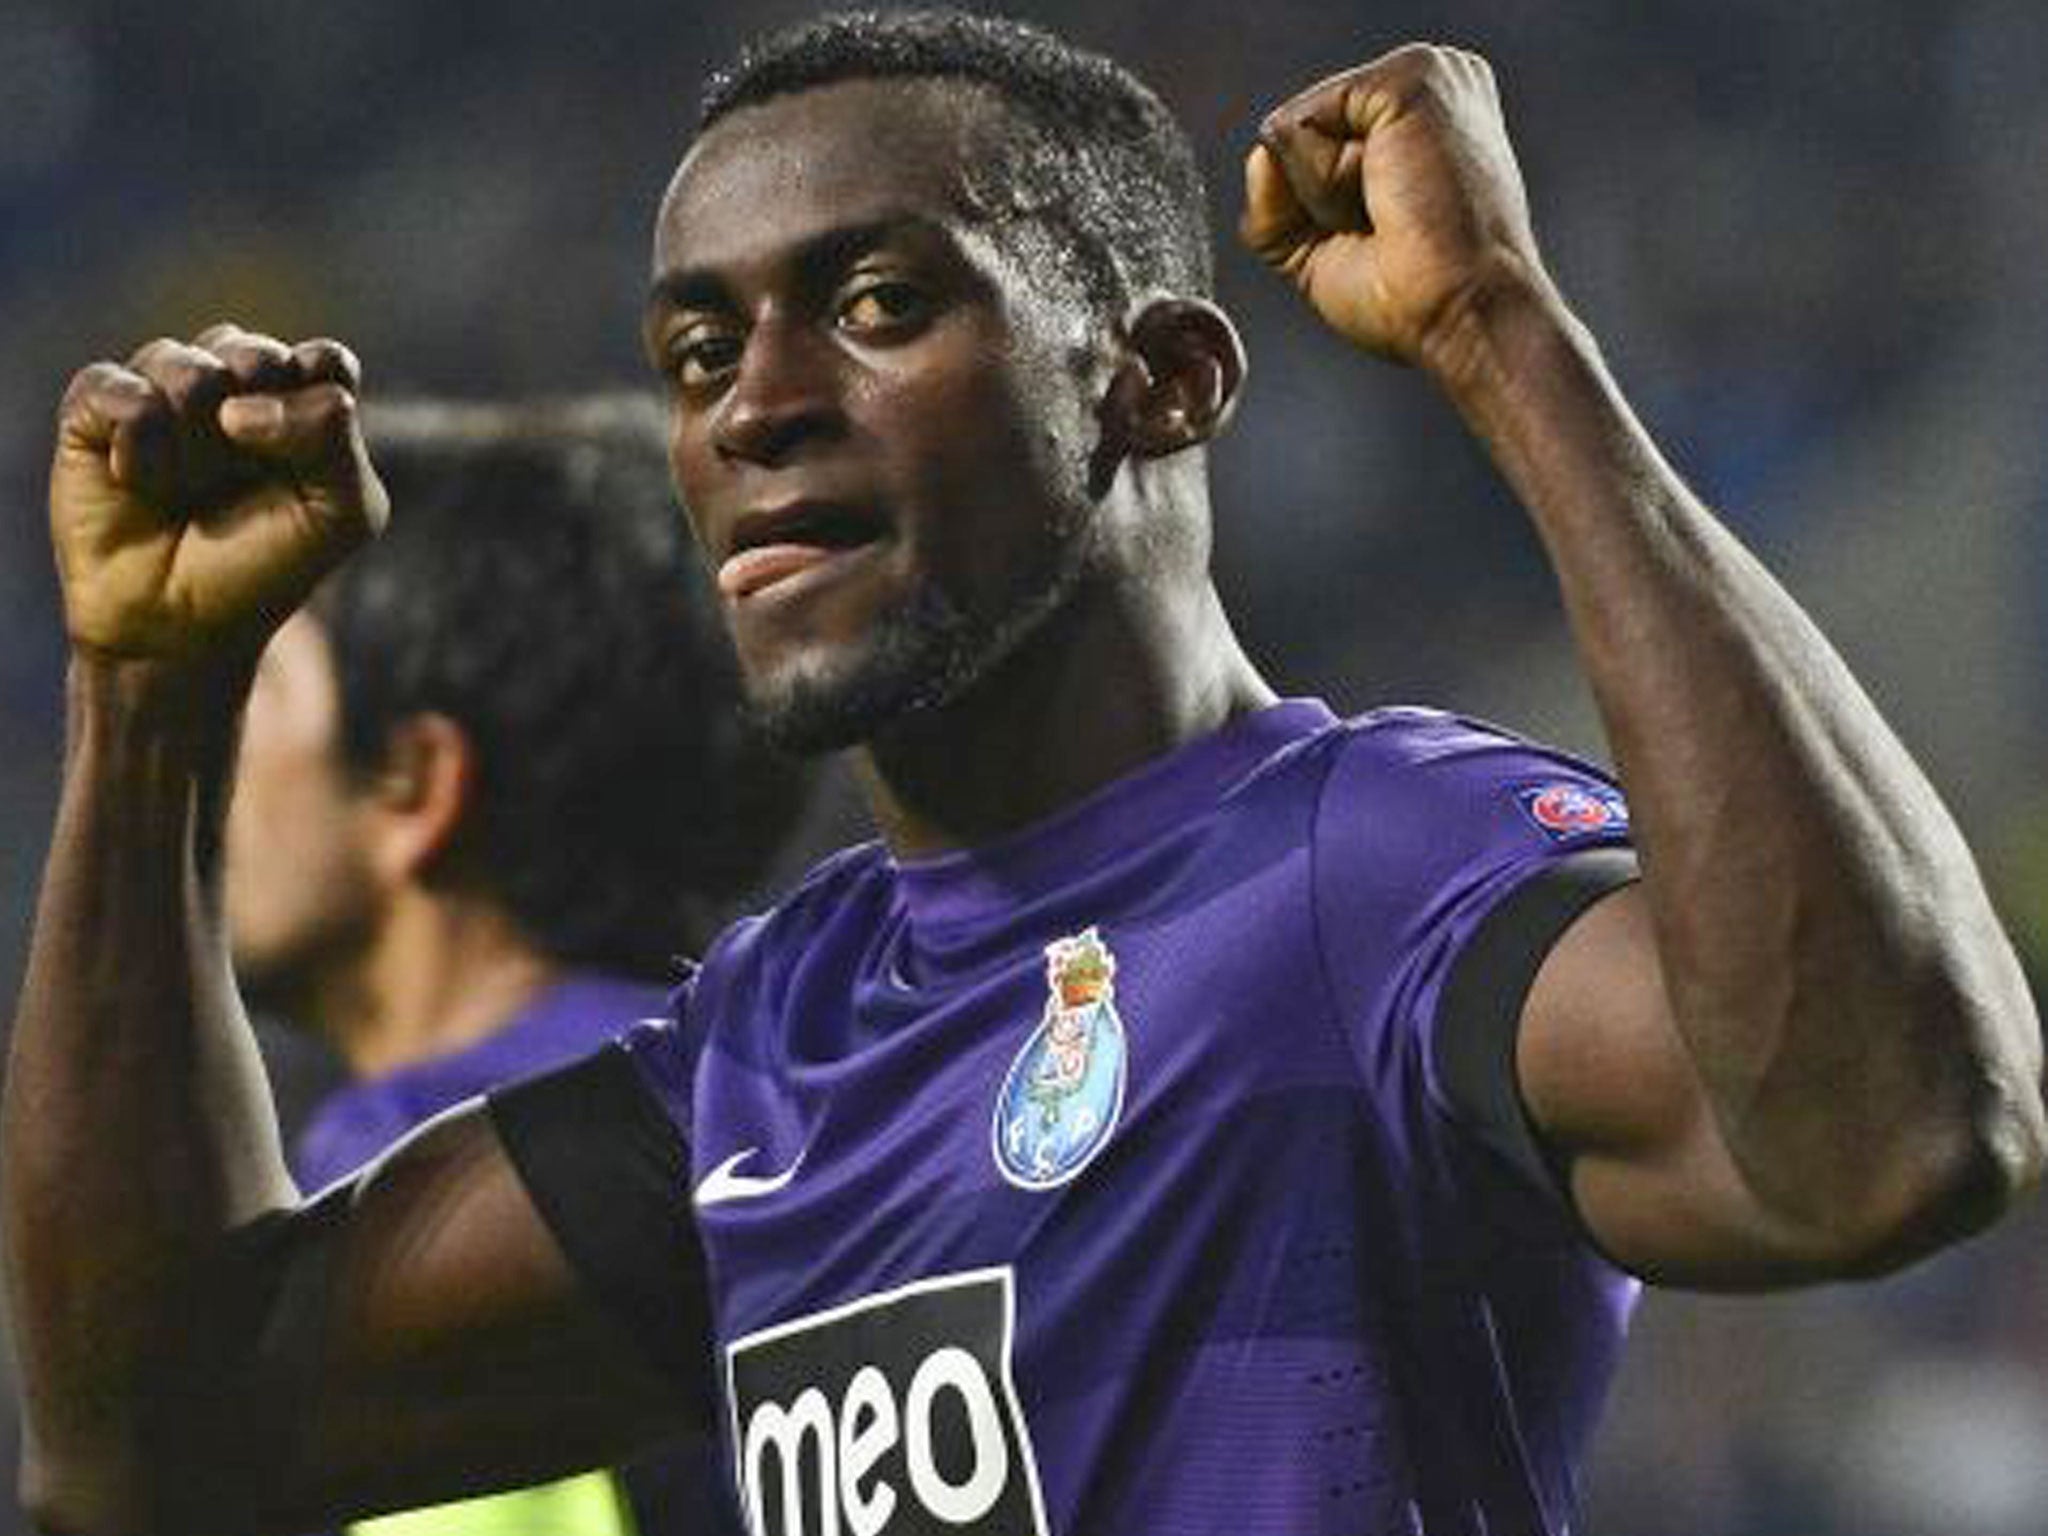 The goals of striker Jackson Martinez are crucial to Porto, who won't want to see him go